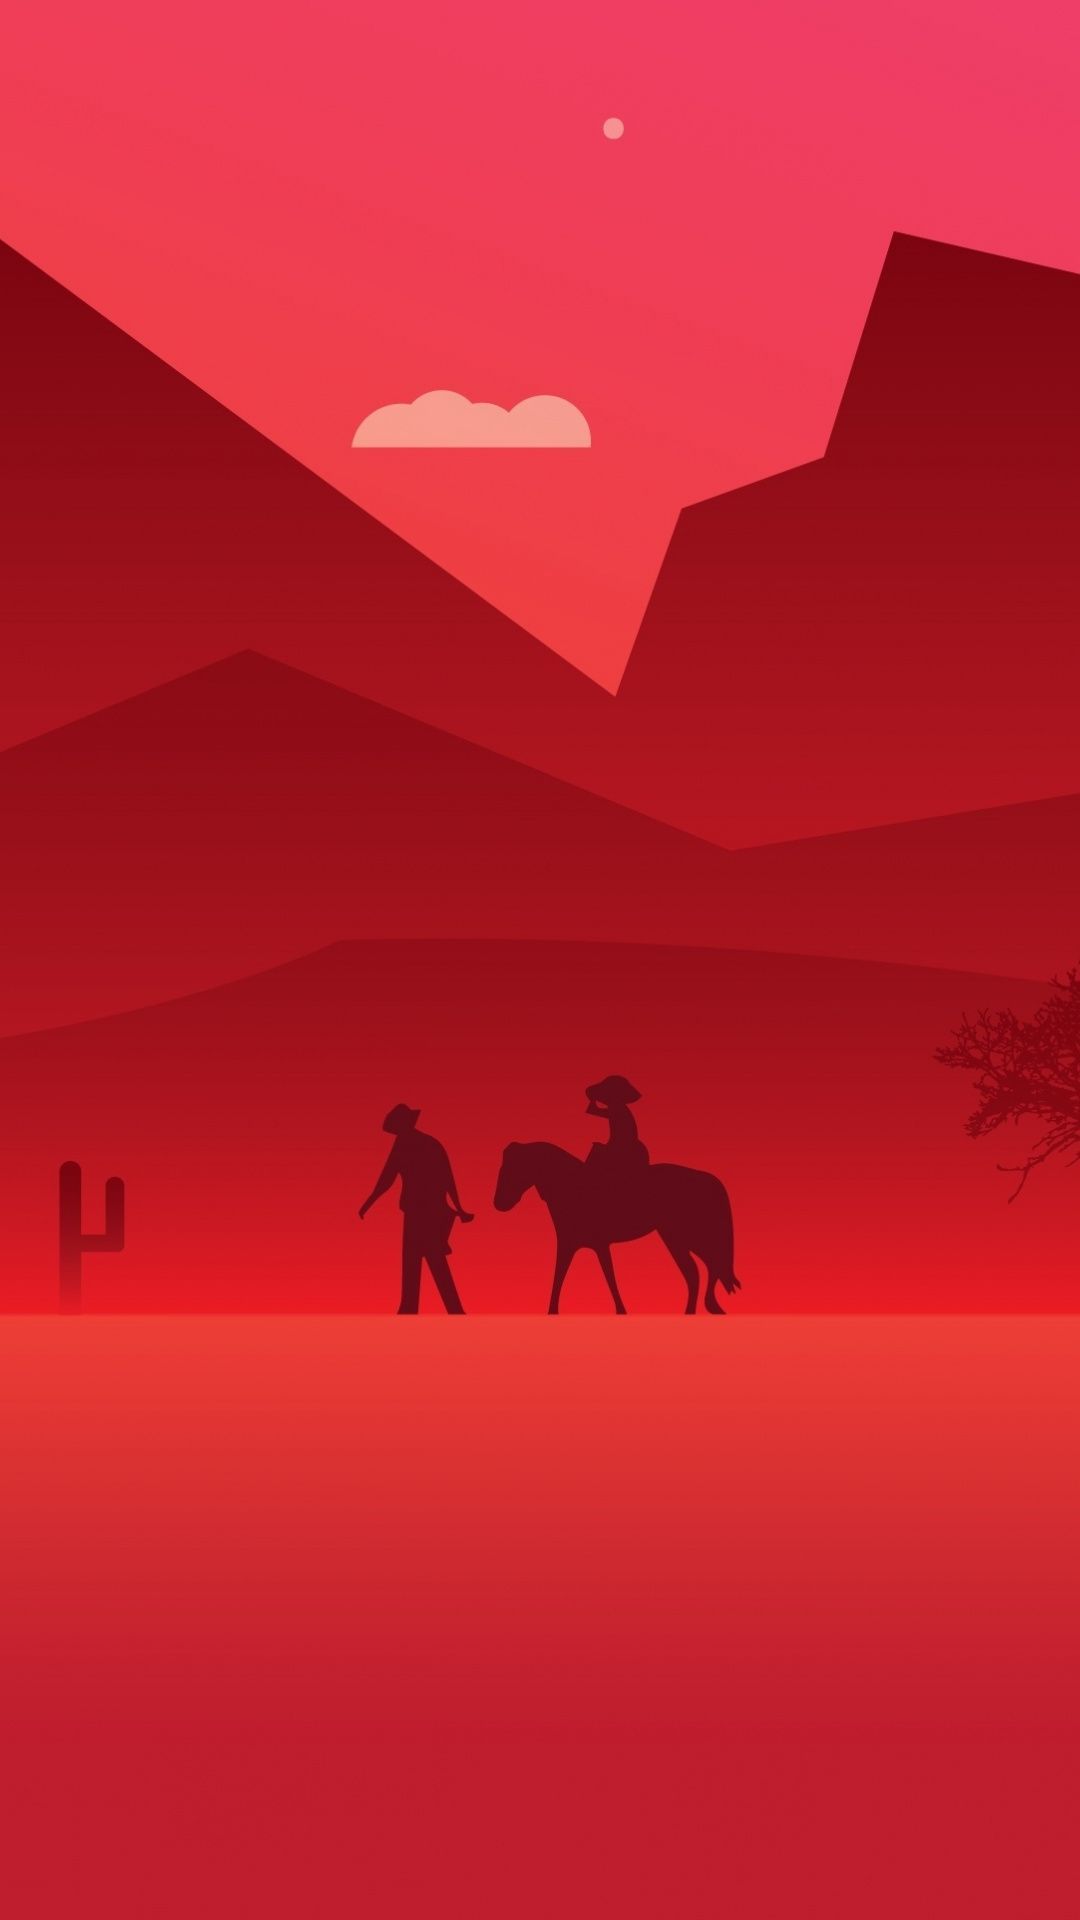 Minimalist Video Game iPhone Background. Red dead redemption, iPhone background, iPhone background pattern